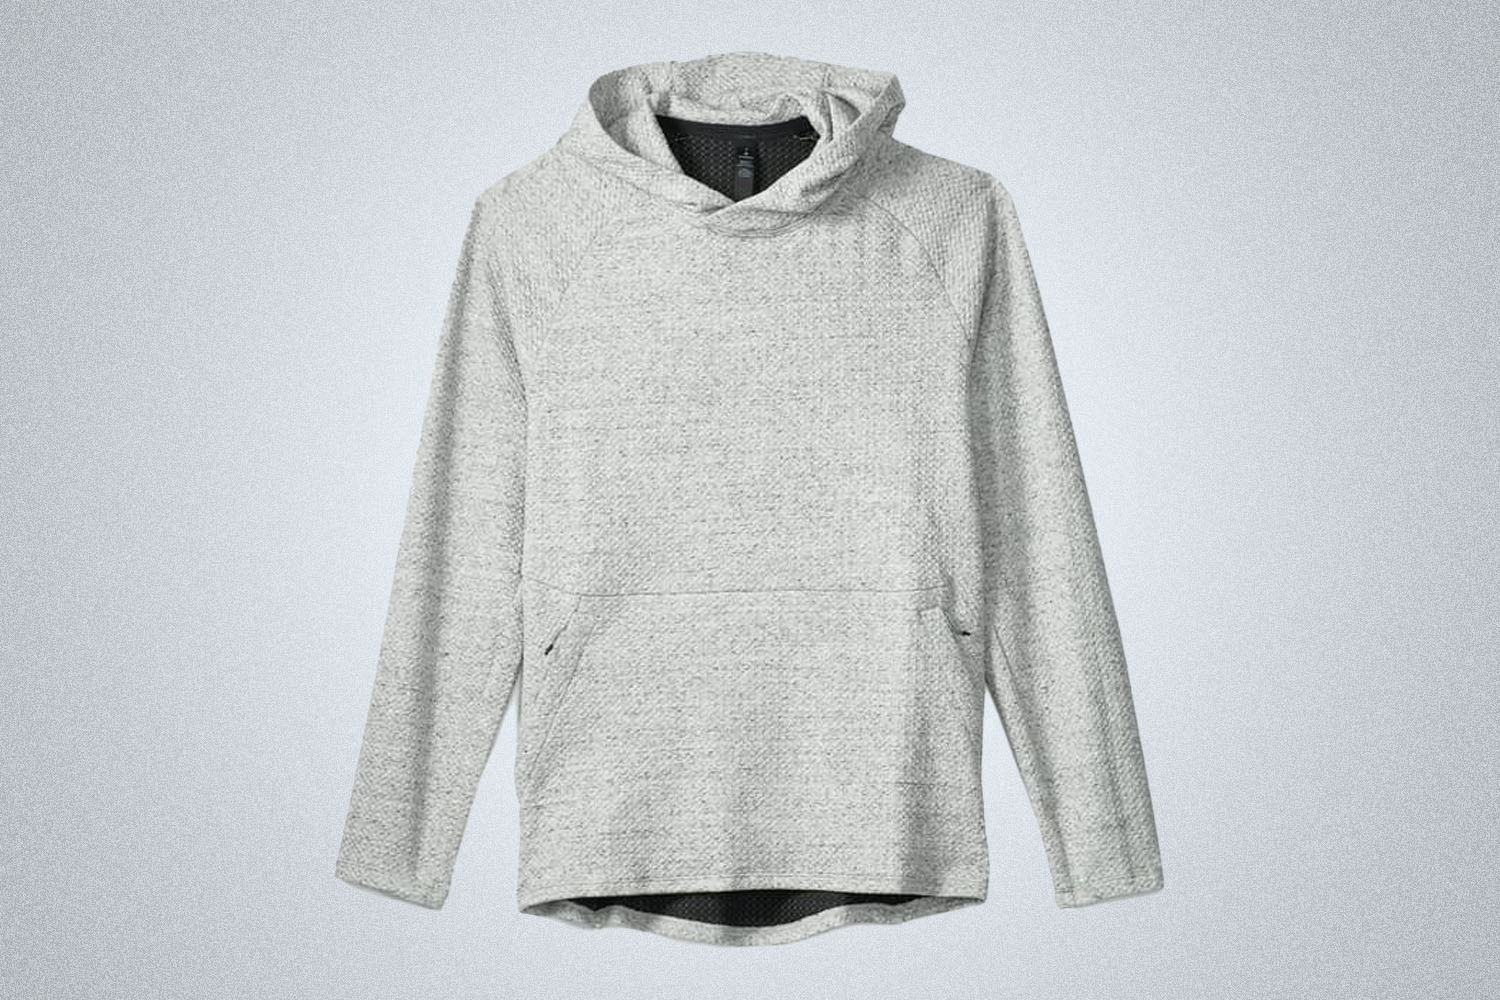 Wear the Lululemon At Ease Hoodie for true comfort this holiday season through 2021